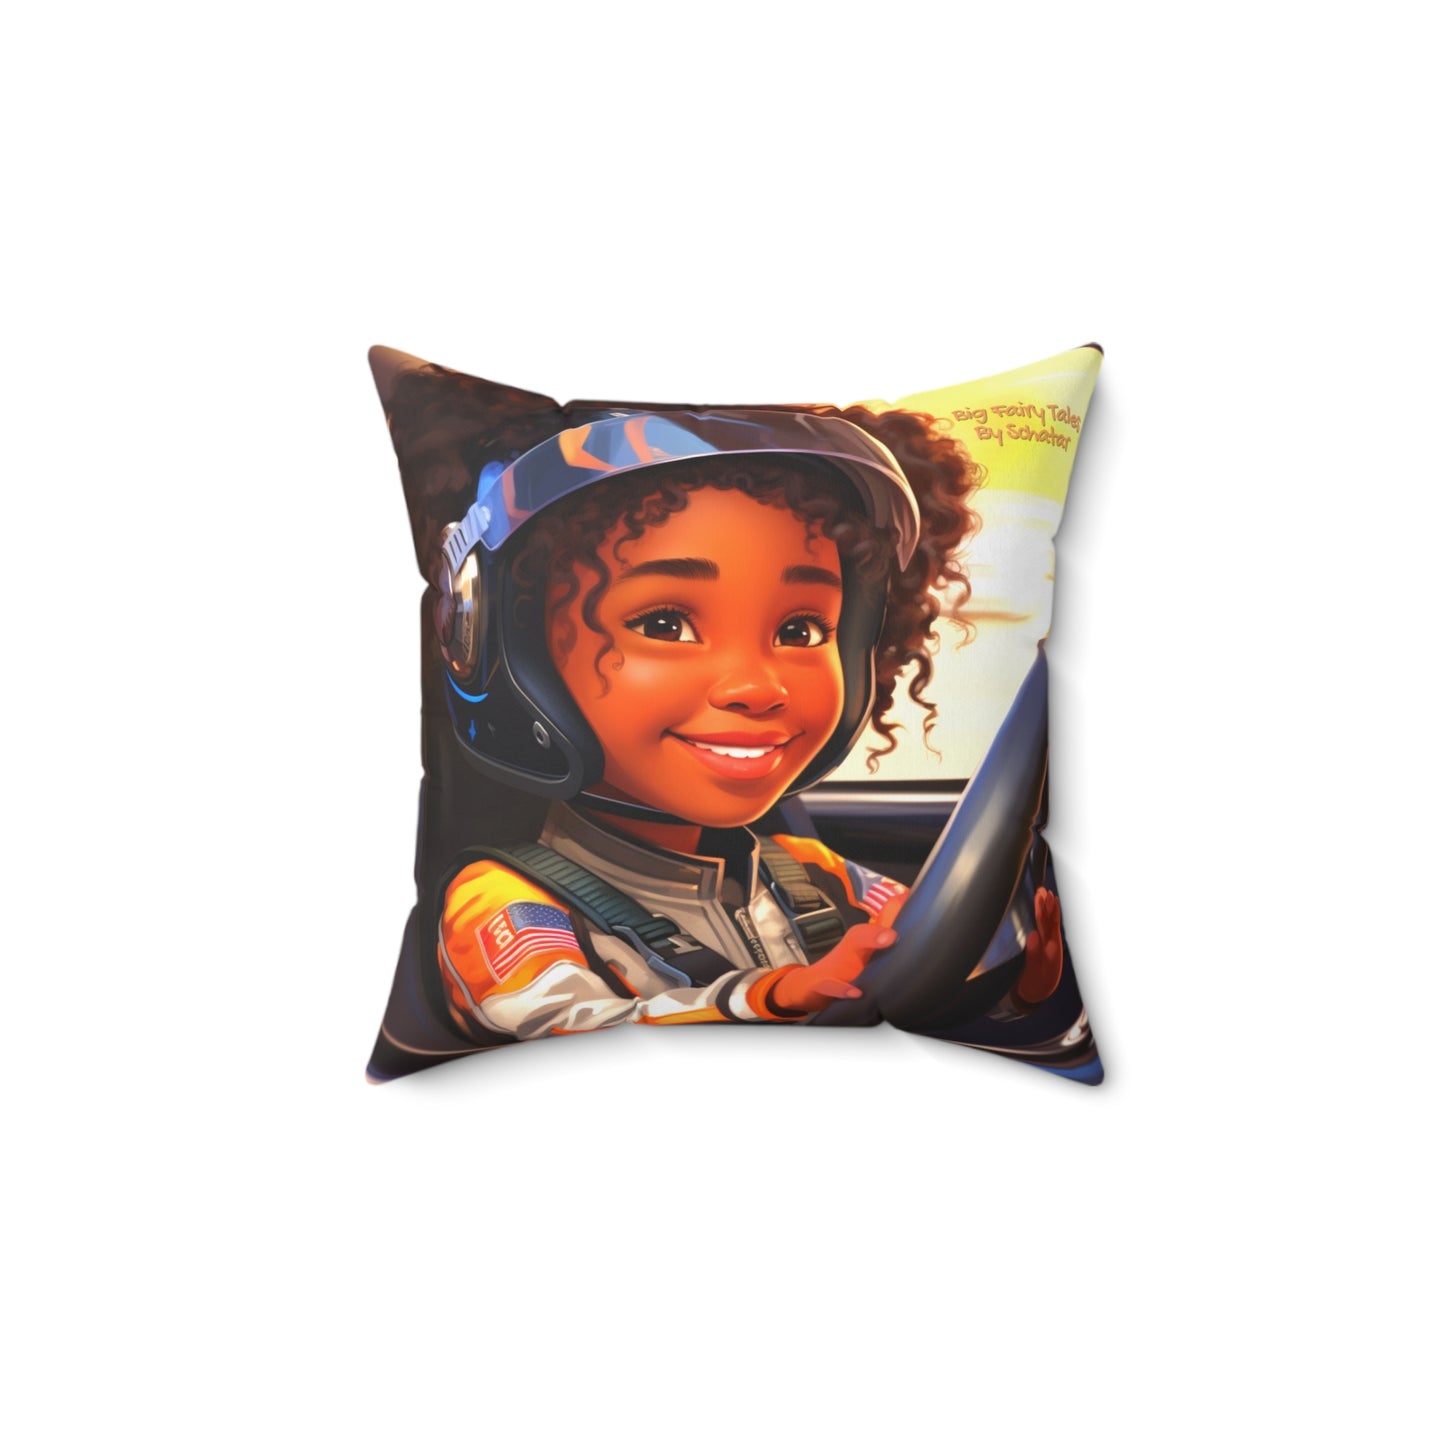 Race Car Driver - Big Little Professionals Plush Pillow 9 From Big Fairy Tales By Schatar